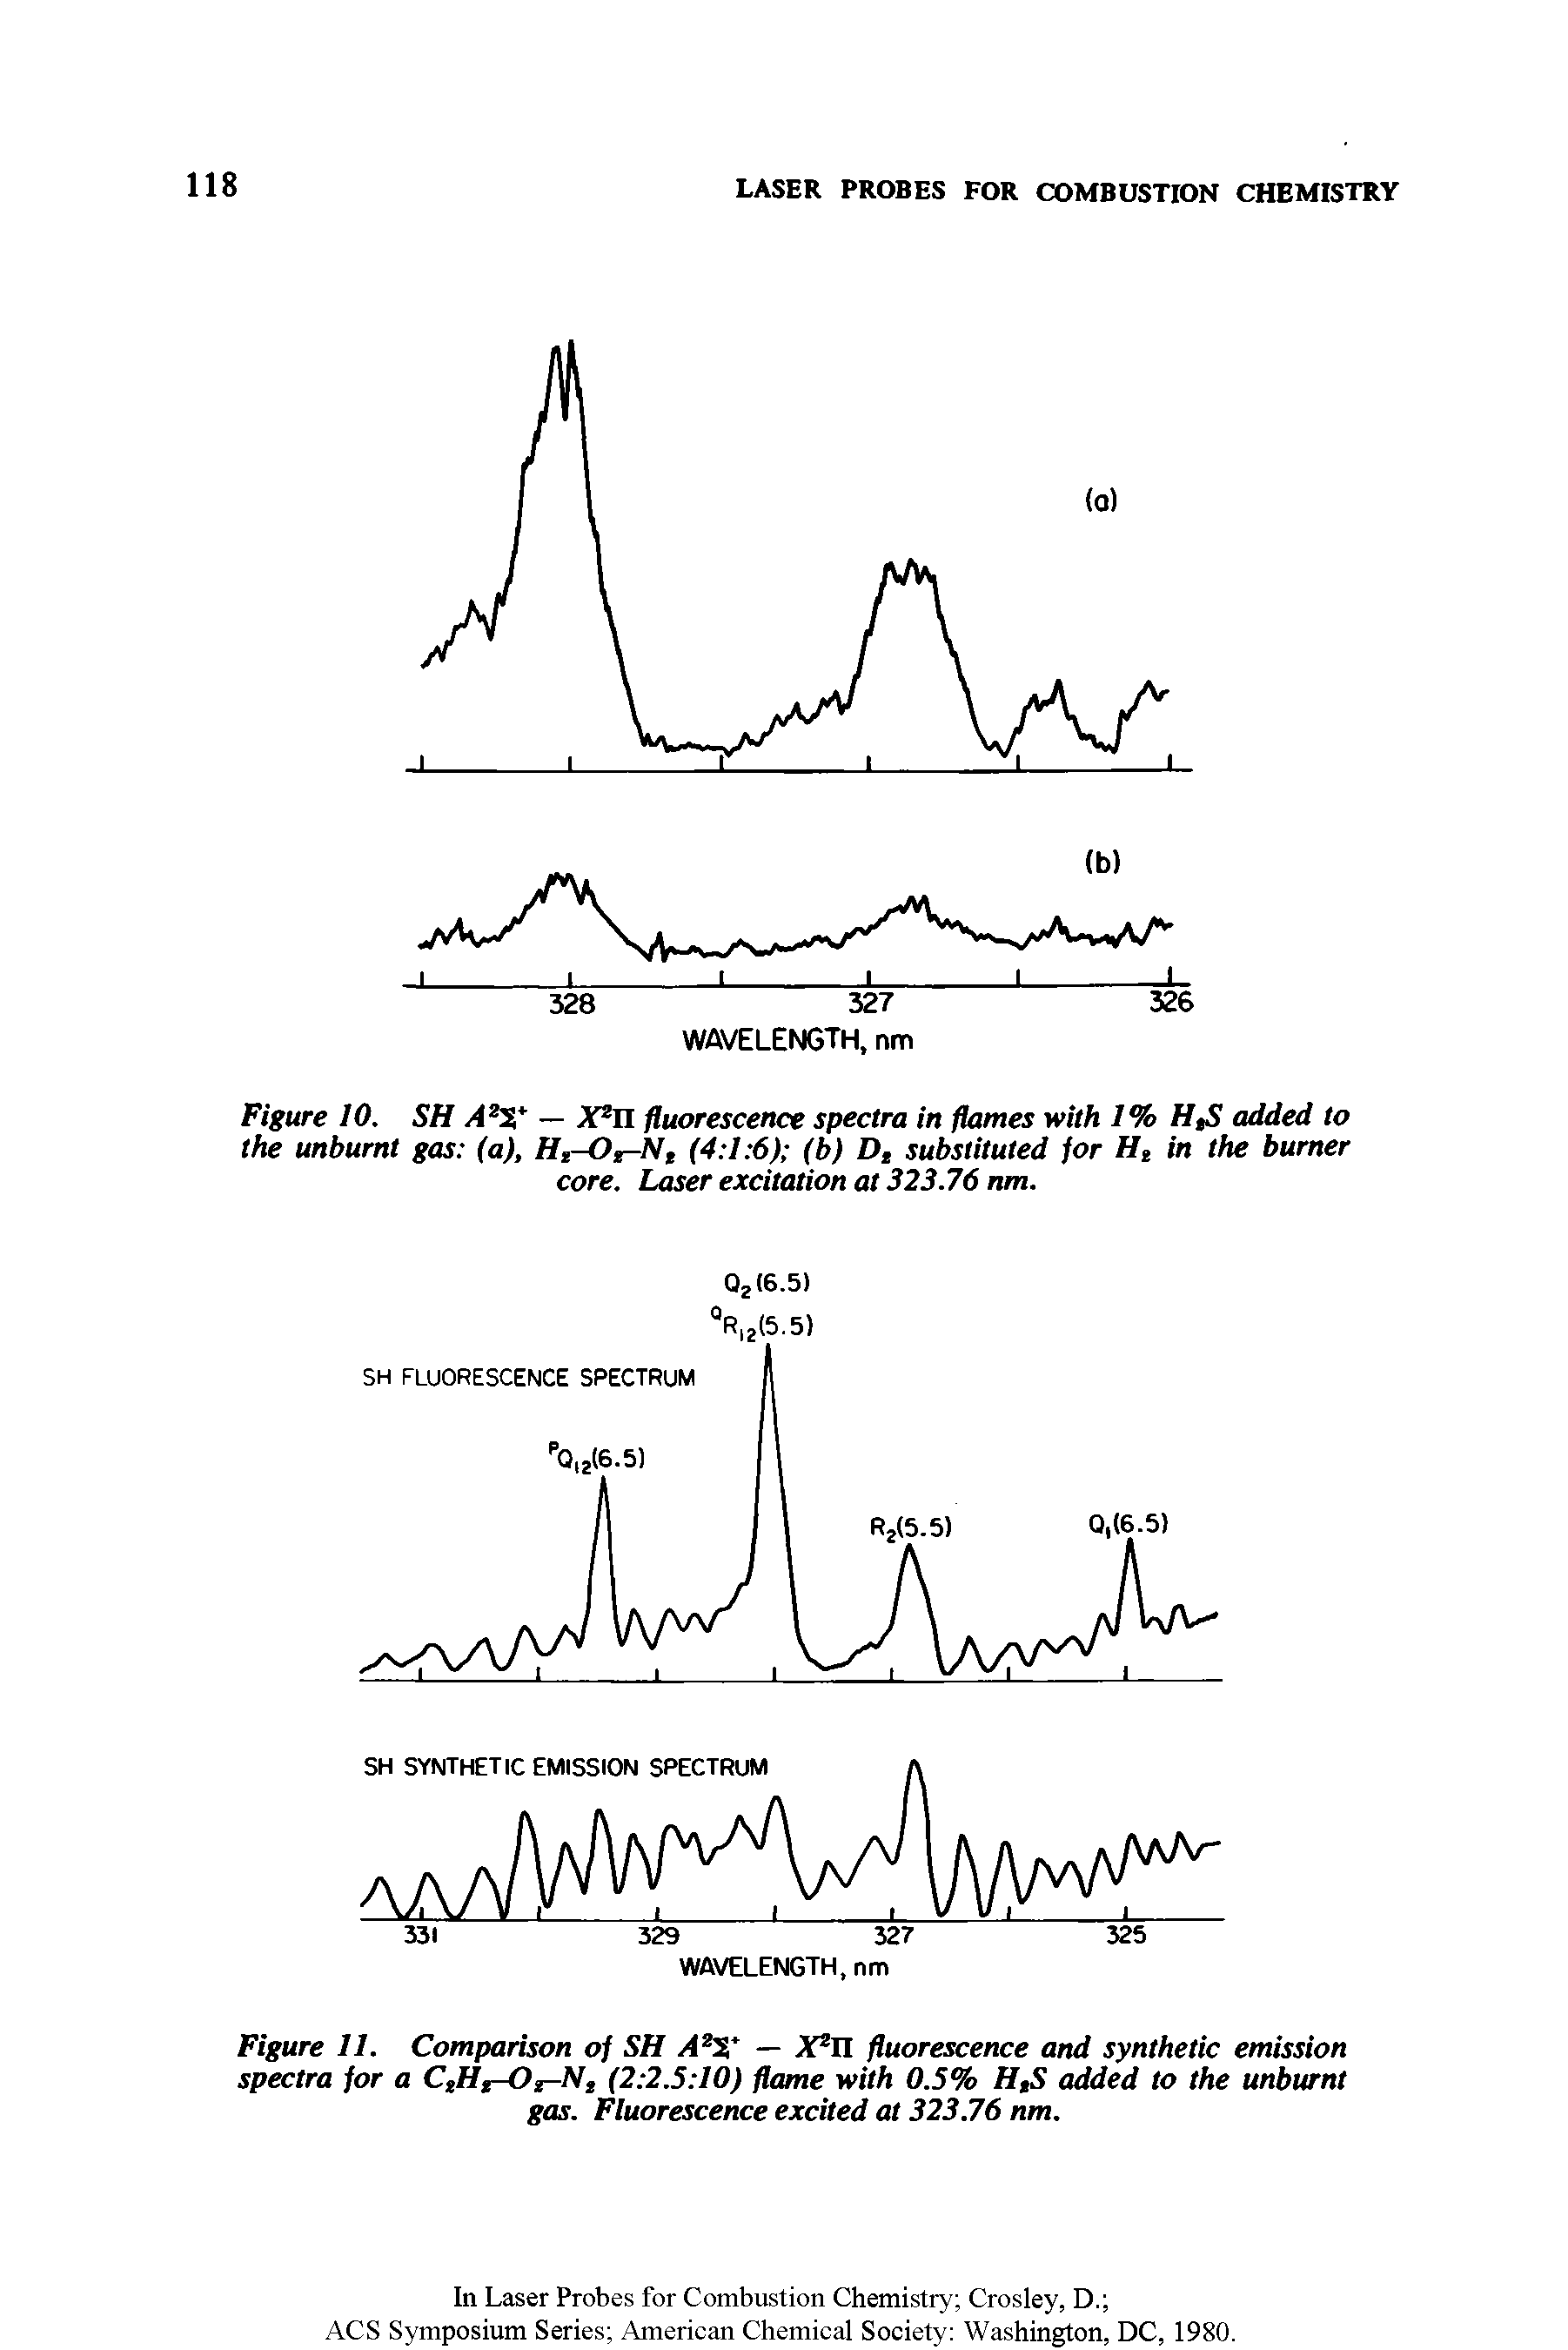 Figure 11. Comparison of SH A2X — X2 fluorescence and synthetic emission spectra for a CtHf-Or-Nt (2 2.5 10) flame with 0.5% H,S added to the unburnt gas. Fluorescence excited at 323.76 nm.